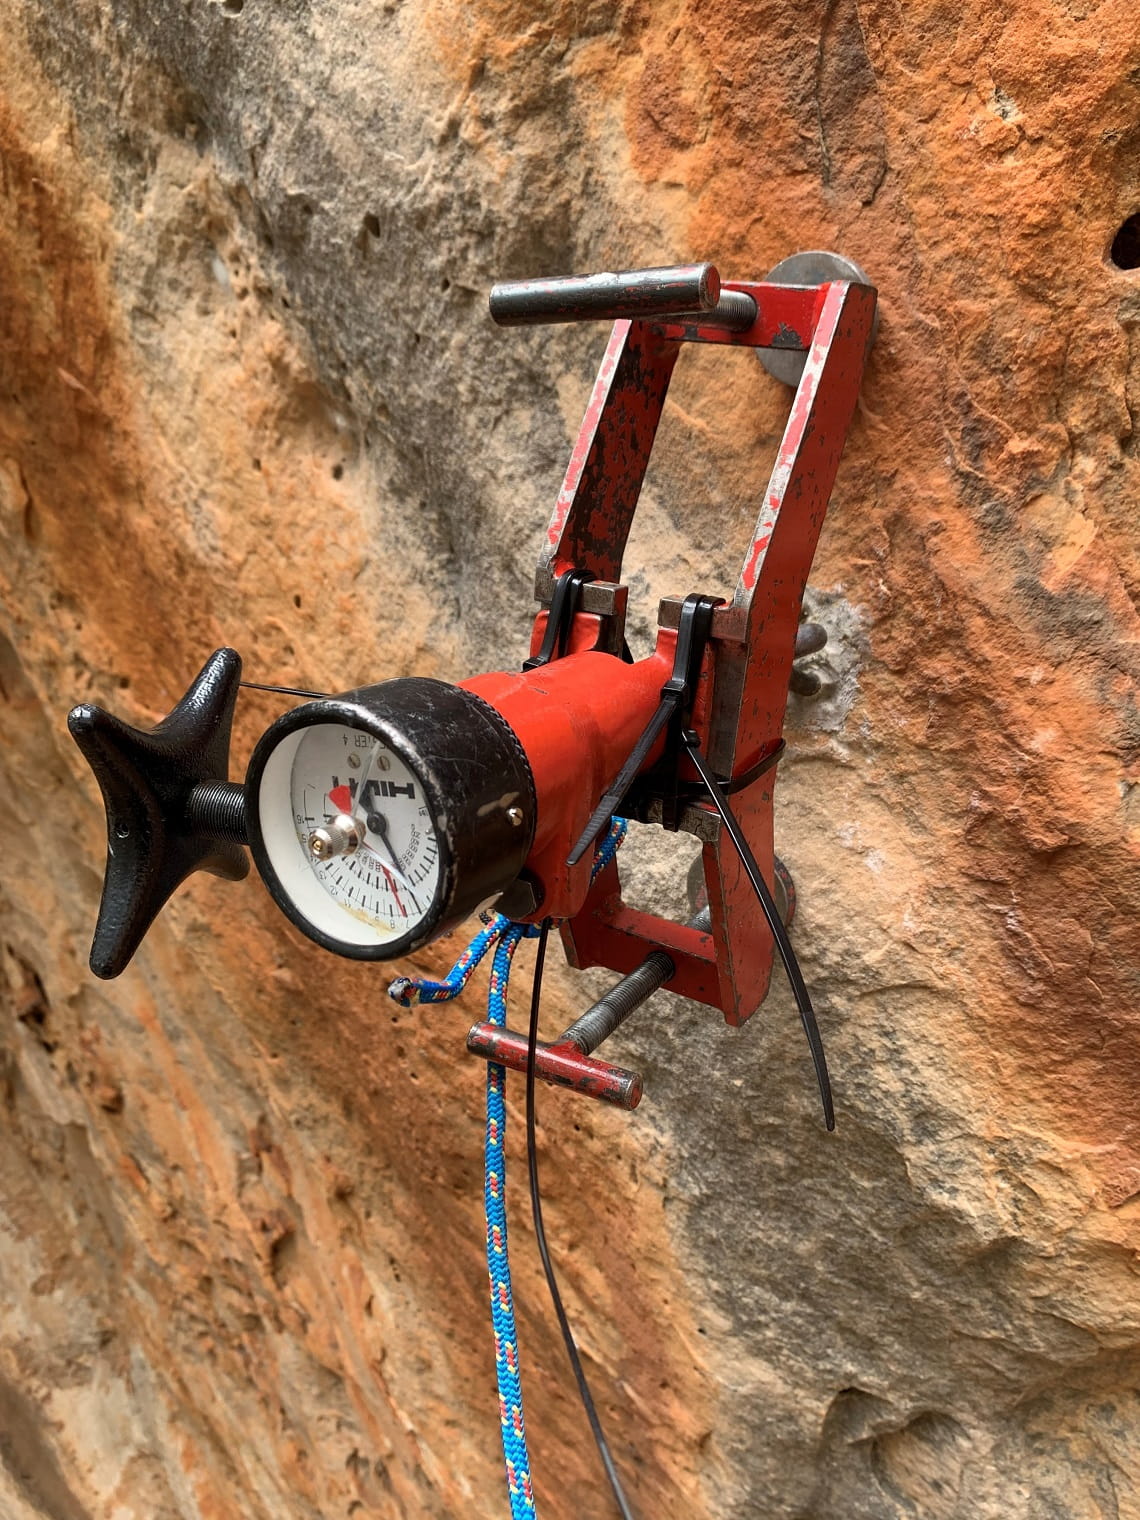 Before fixed bolts are removed they are load-tested by rope access technicians.